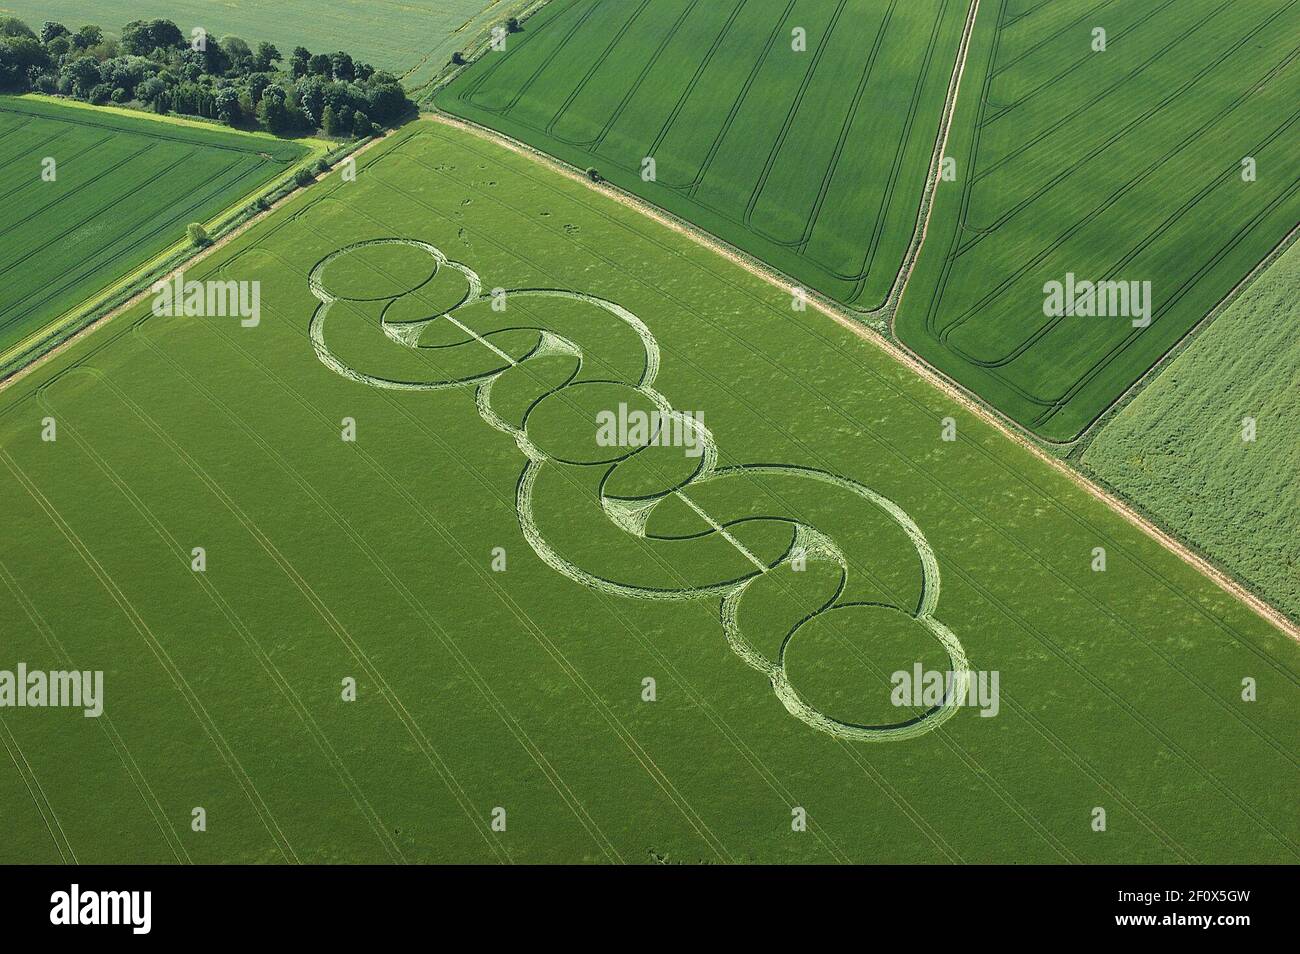 ONE OF THE FIRST CROP CIRCLES OF THE YEAR IS MORE COMPLICATED AND LARGER THAN ANY CIRCLE EVER SEEN SO EARLY IN THE SEASON. IT APPEAREED OVERNIGHT IN A FIELD AT BECKHAMPTON, WILTSHIRE AND MEASURES A STAGGERING 1,000 FEET IN LENGTH. CROP CIRCLE EXPERT  STEVE ALEXANDER, FROM  HAMPSHIRE HAMPSHIRE SAID ''IF CIRCLES OF THUIS MAGNITUDE ARE APPEARING SO EARLY IN THE SEASON WHAT ON EARTH WILL FOLLOW LATER IN THE SUMMER'' 2005 Stock Photo